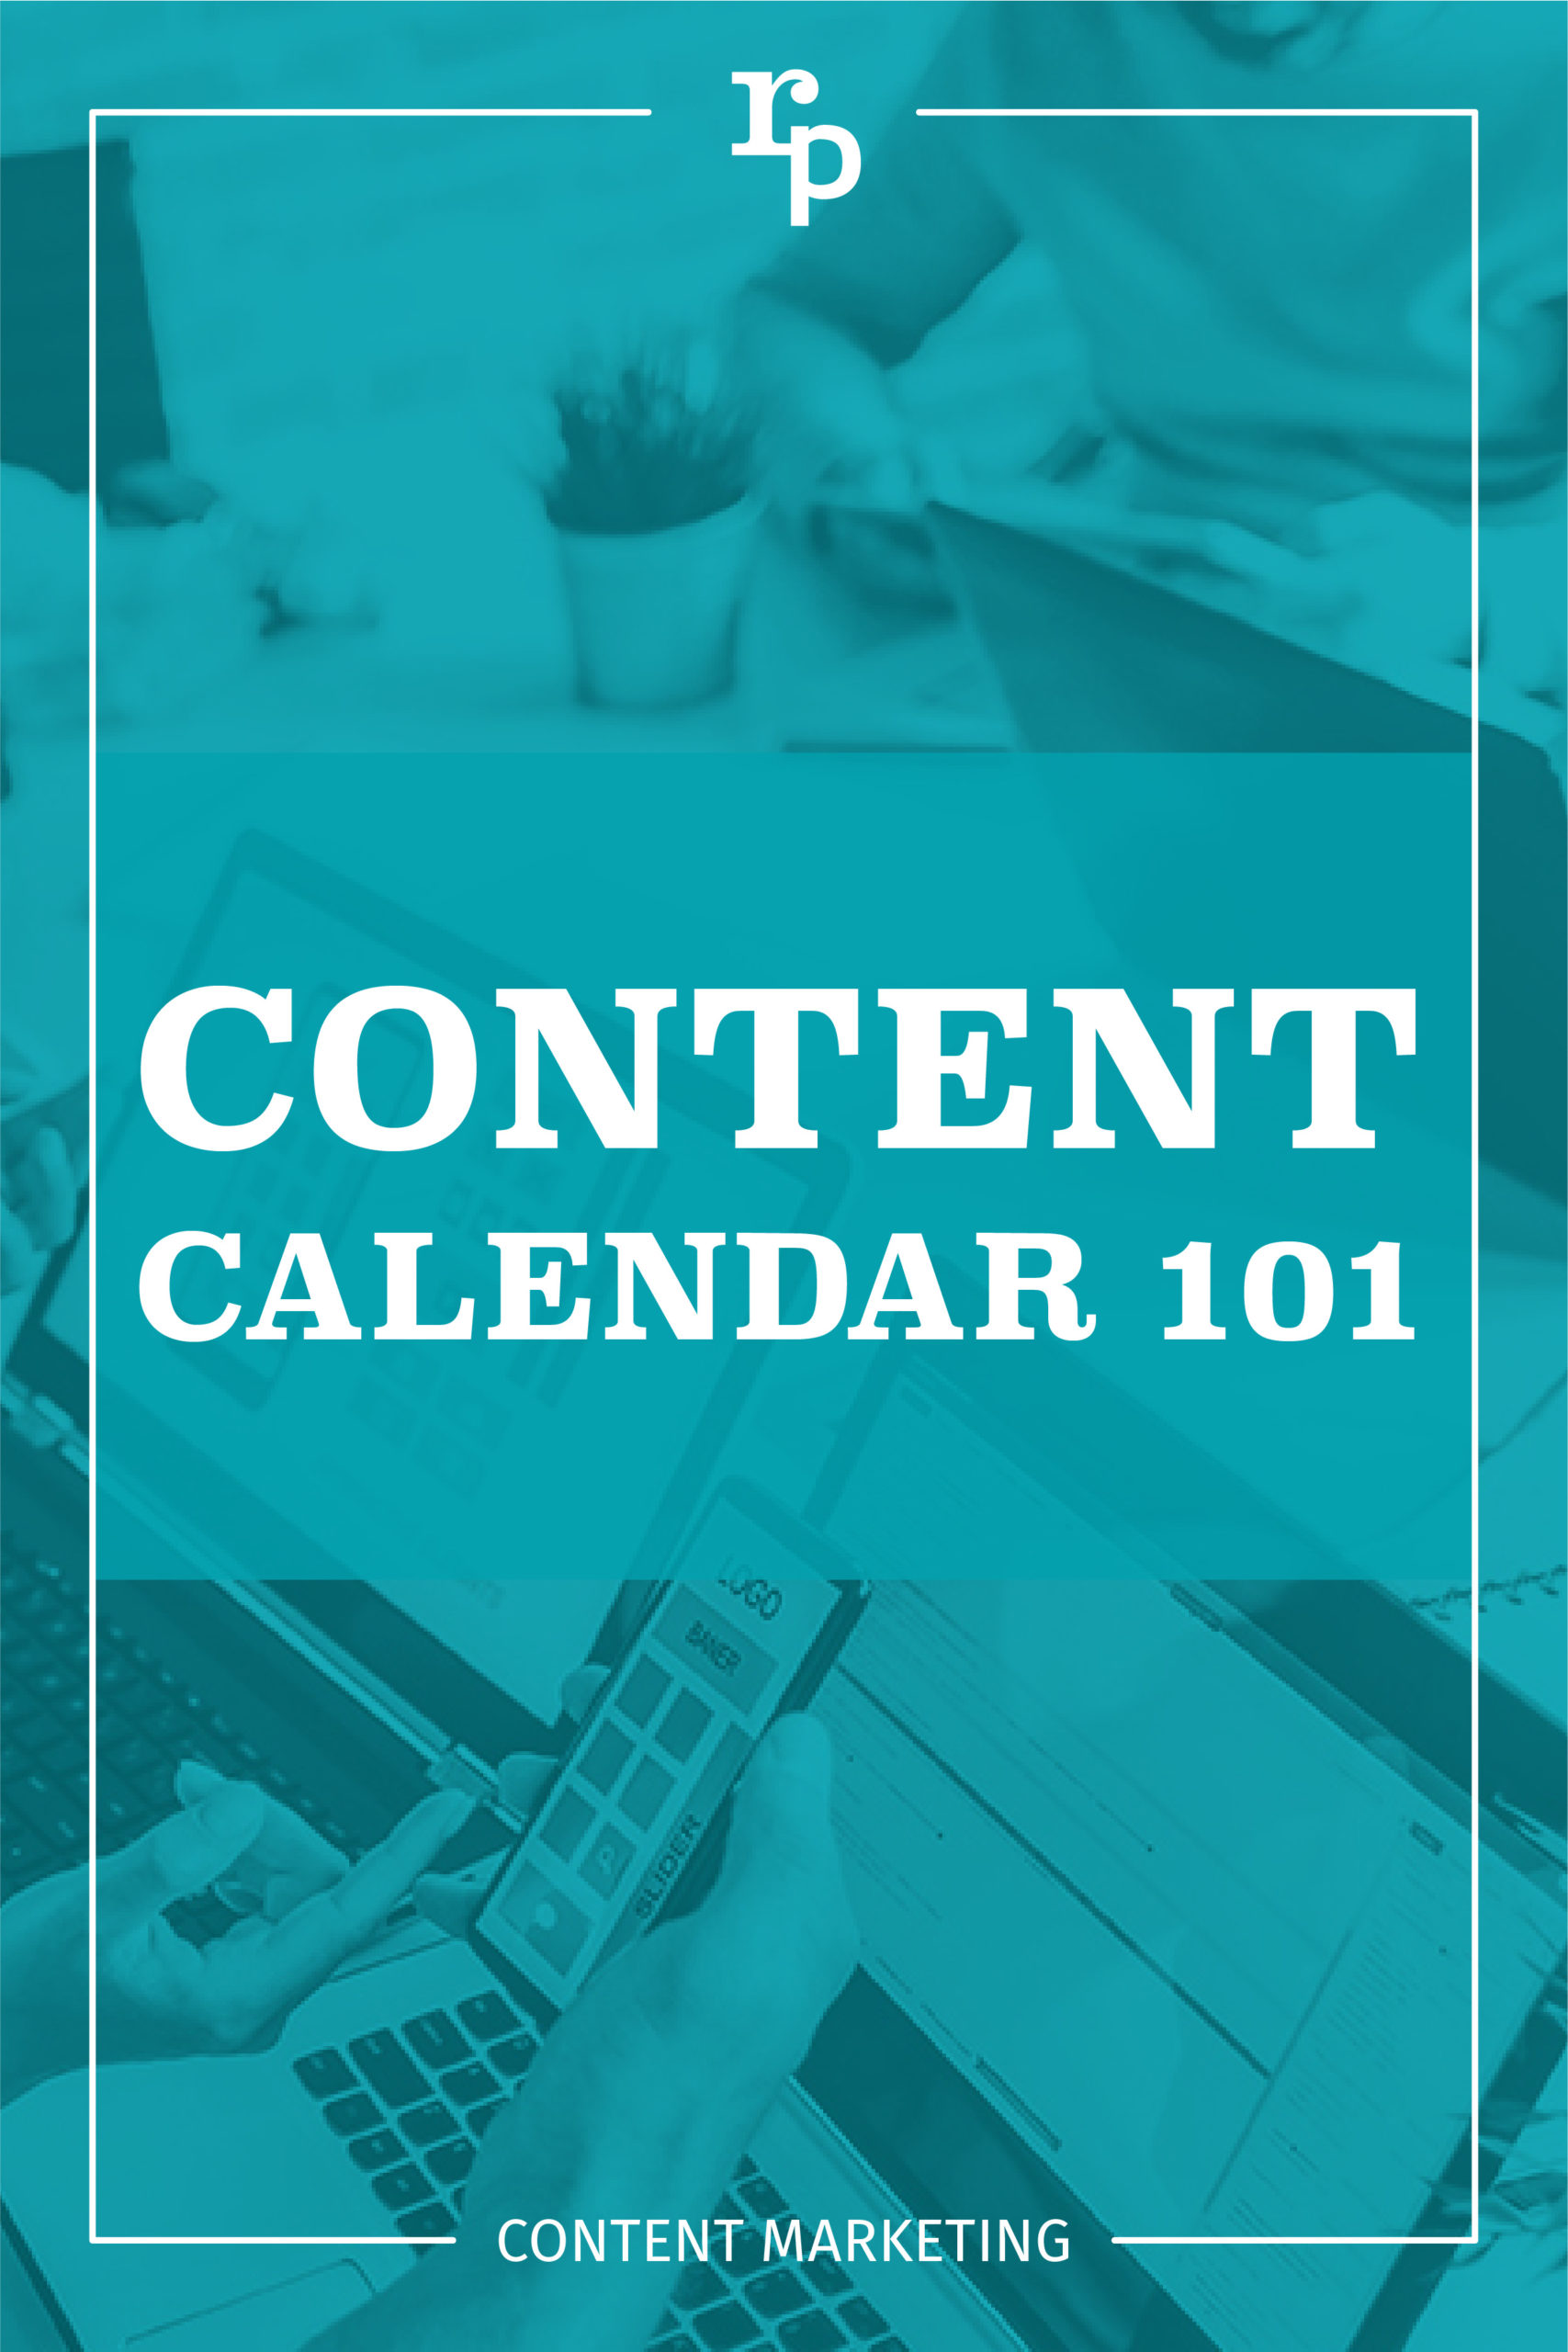 content calendar 101 content1 pin teal scaled